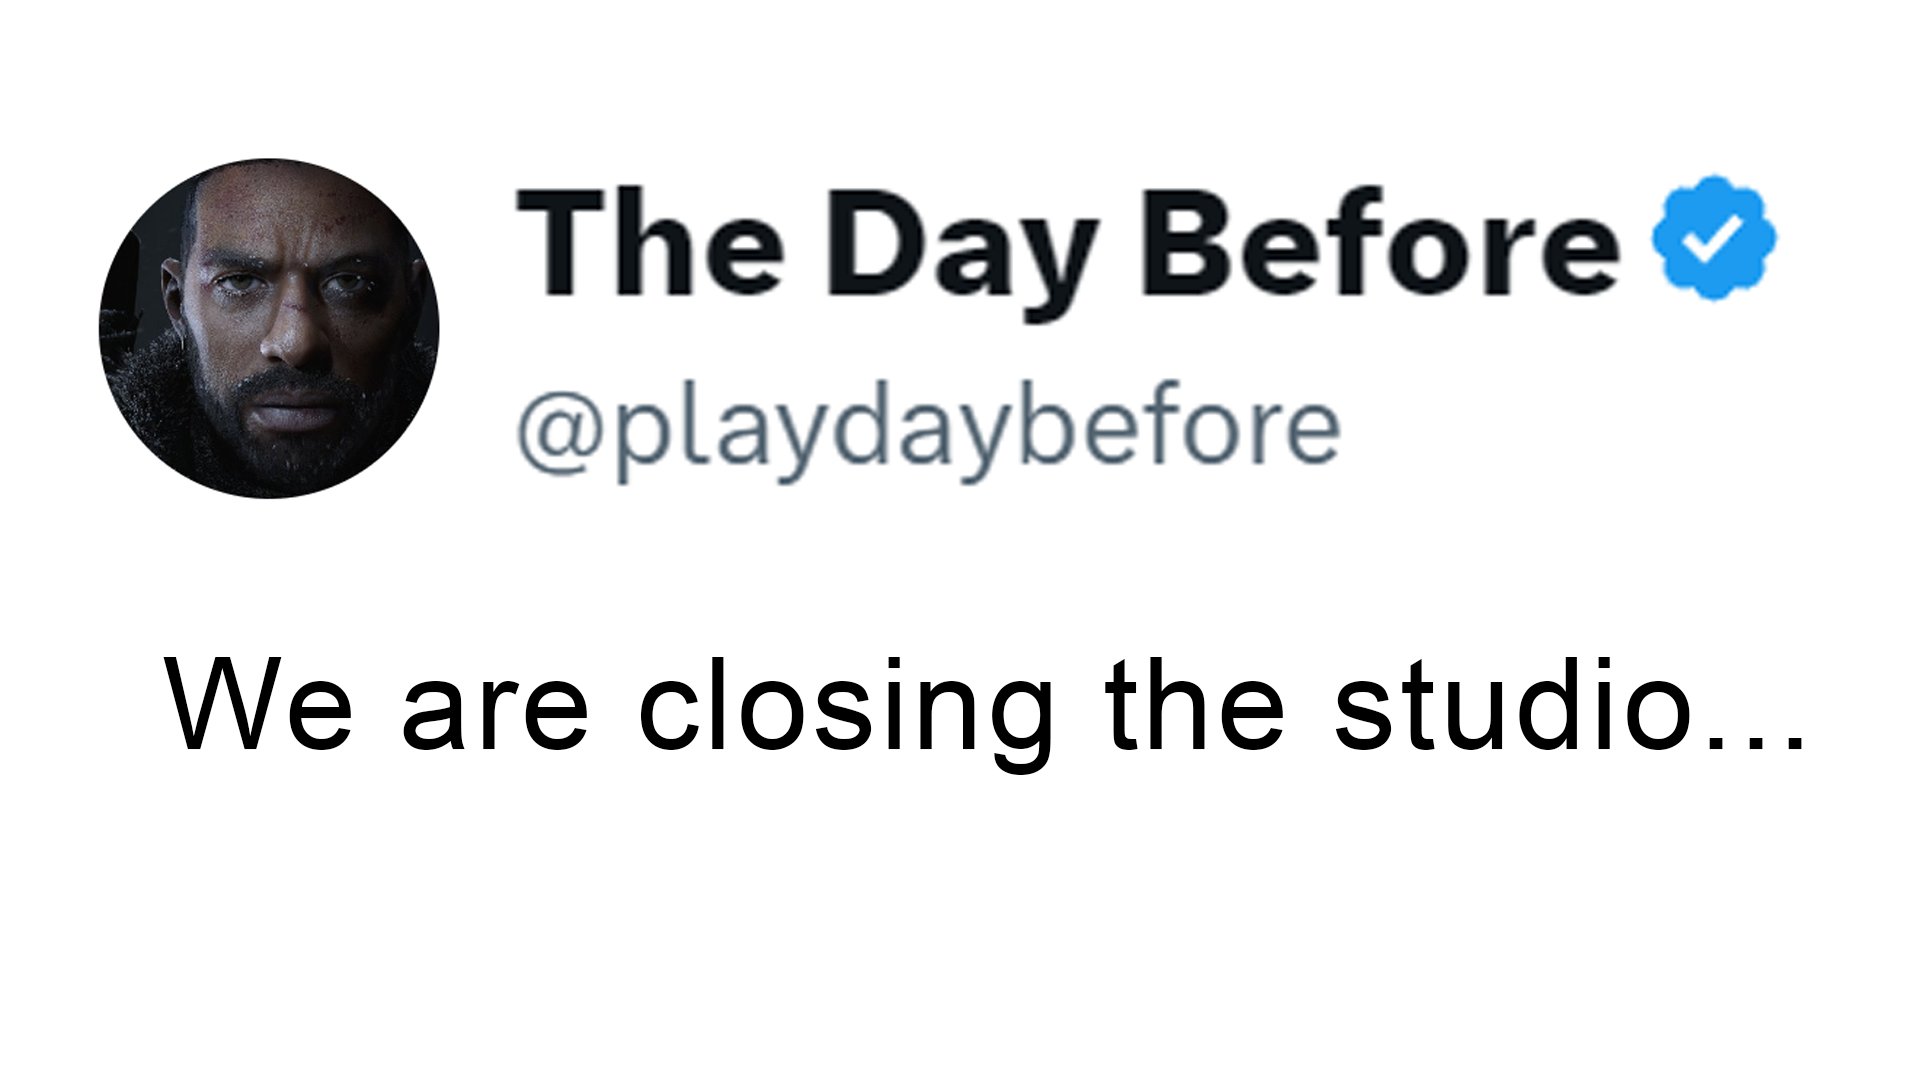 The Day Before (@playdaybefore) / X